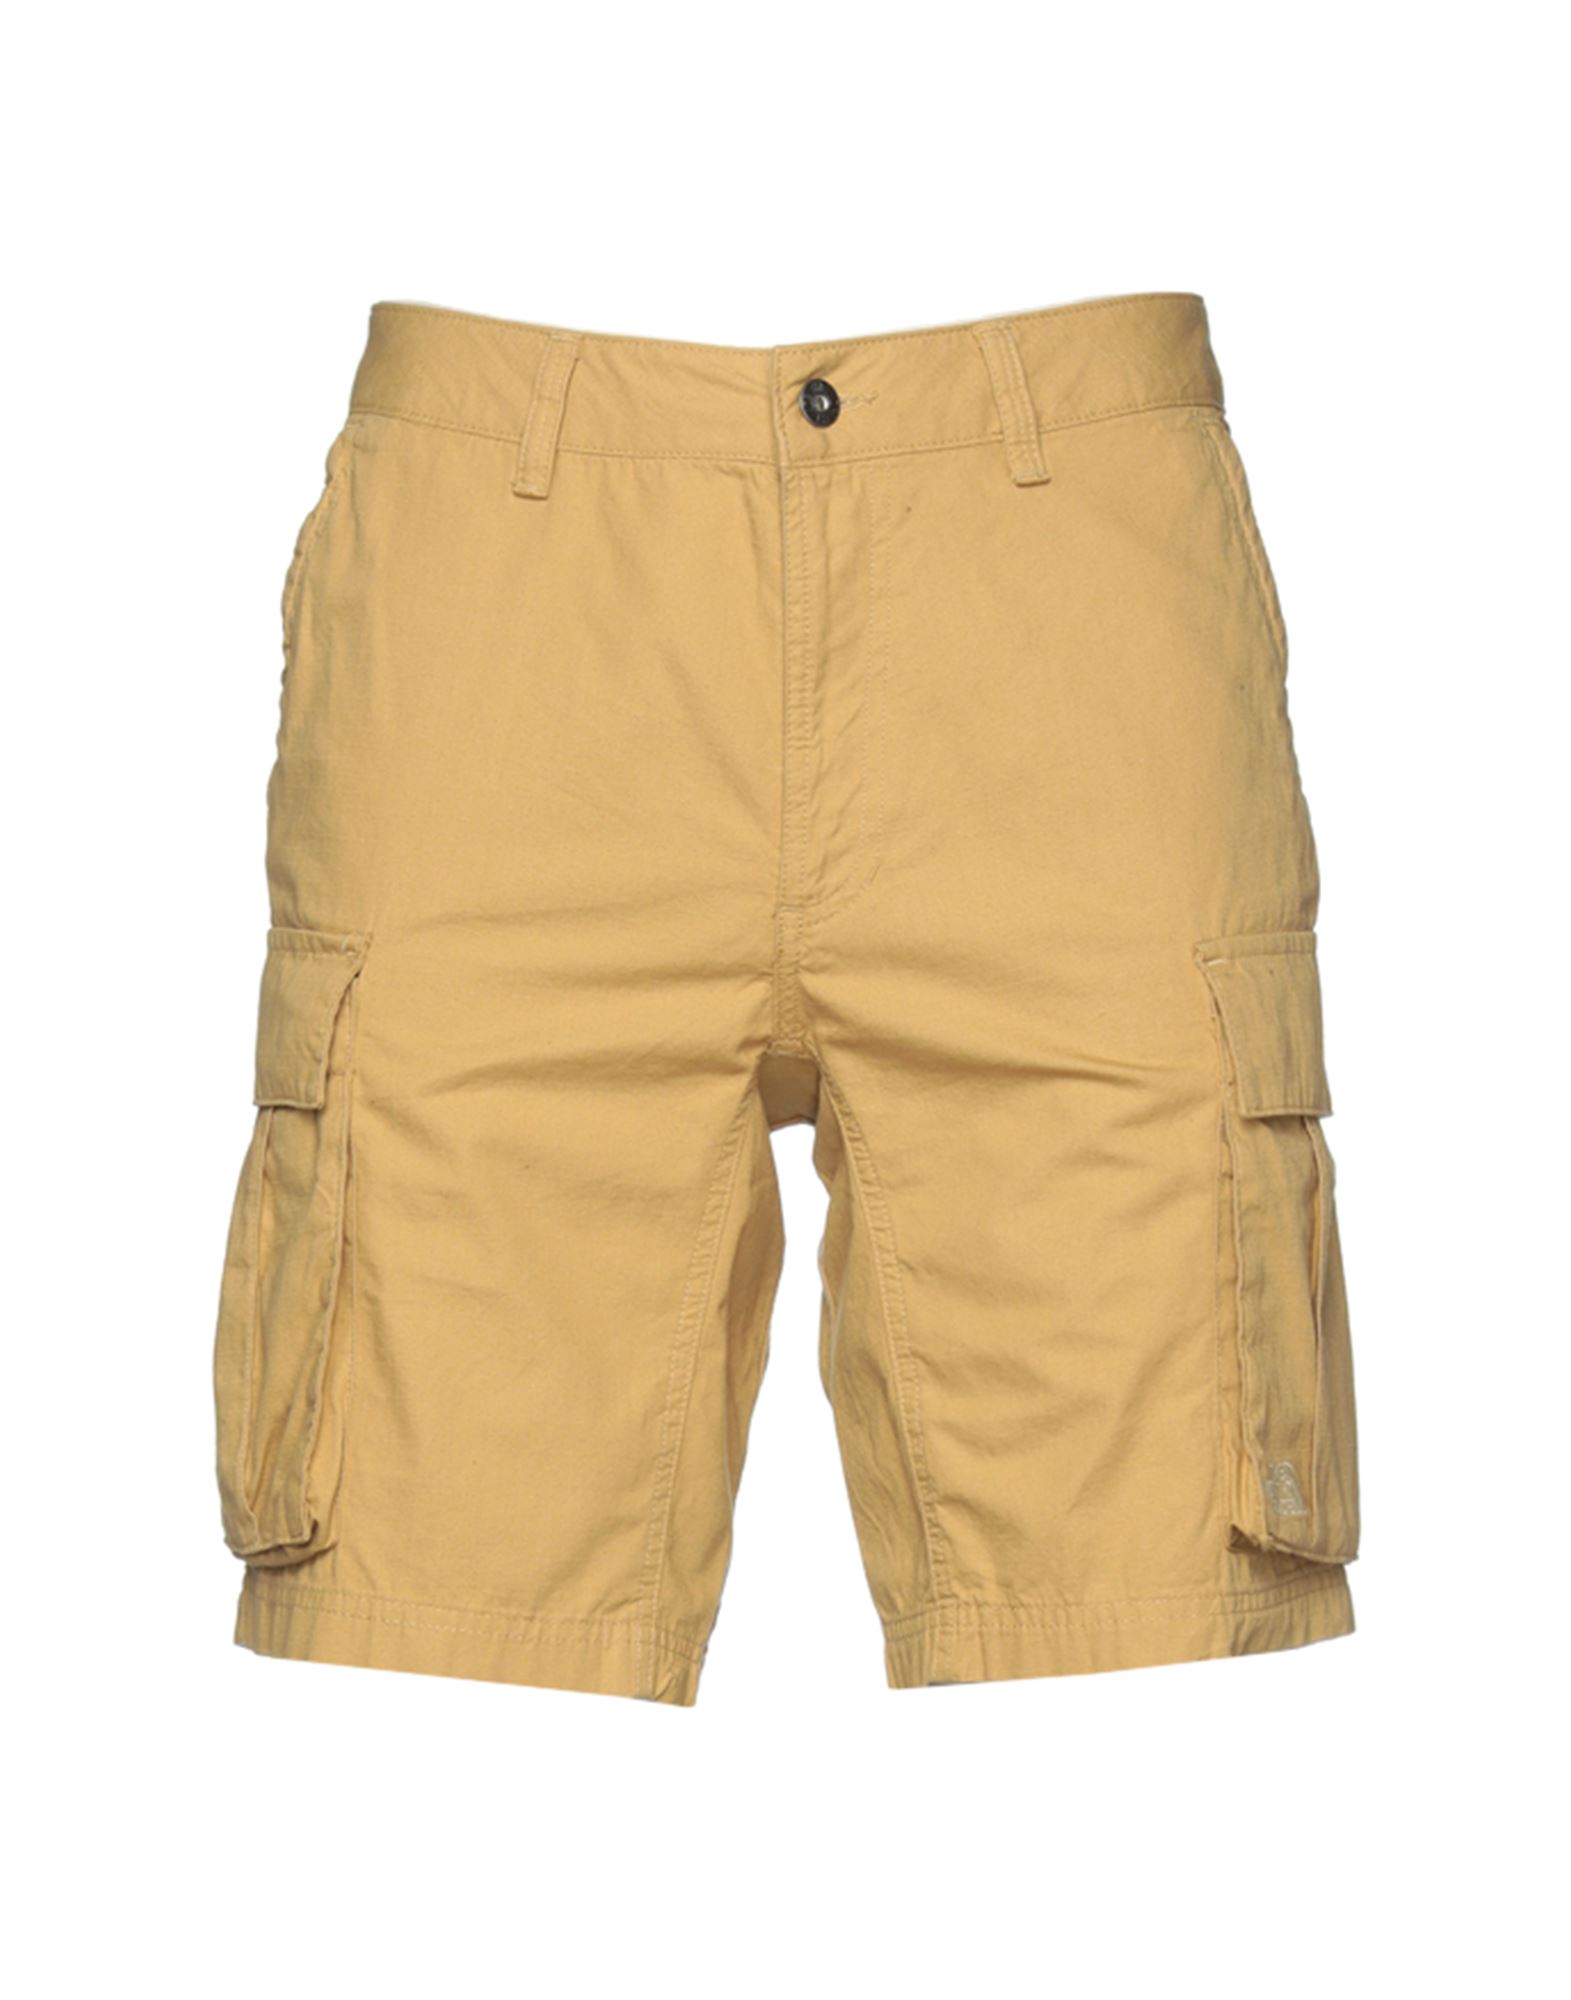 THE NORTH FACE THE NORTH FACE M ANTICLINE SHORT MAN SHORTS & BERMUDA SHORTS SAND SIZE 28 COTTON